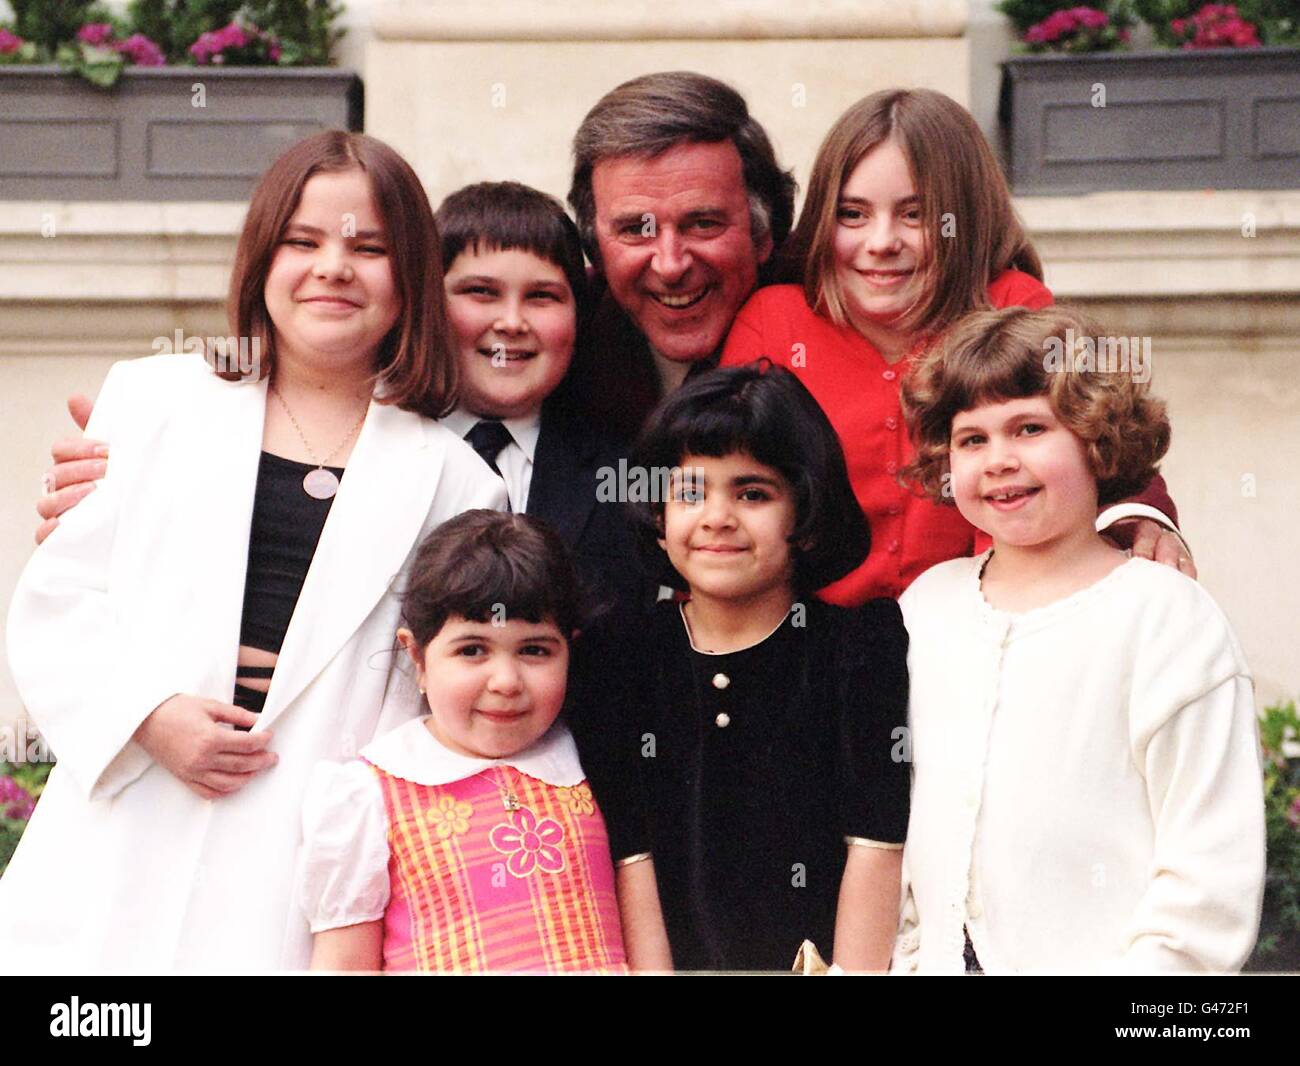 TV and radio presenter Terry Wogan surrounded by children who suffer from arthritis, during today's (Weds) launch of the Charter for children with arthritis in London. (l/r clockwise) Dionne Smith, 13, from Grays in Essex, James Hurson, 12, from Wembley, Danielle Harris, 11, from Surrey, Laura Hillyer, 9, from Burnham, Bucks, Zarfishan Malik, 6, from Dollis Hill and Gabriela Williams, 5, from Hillingdon. Photo by Helen Tilley. See PA Story SHOWBIZ Wogan. Stock Photo